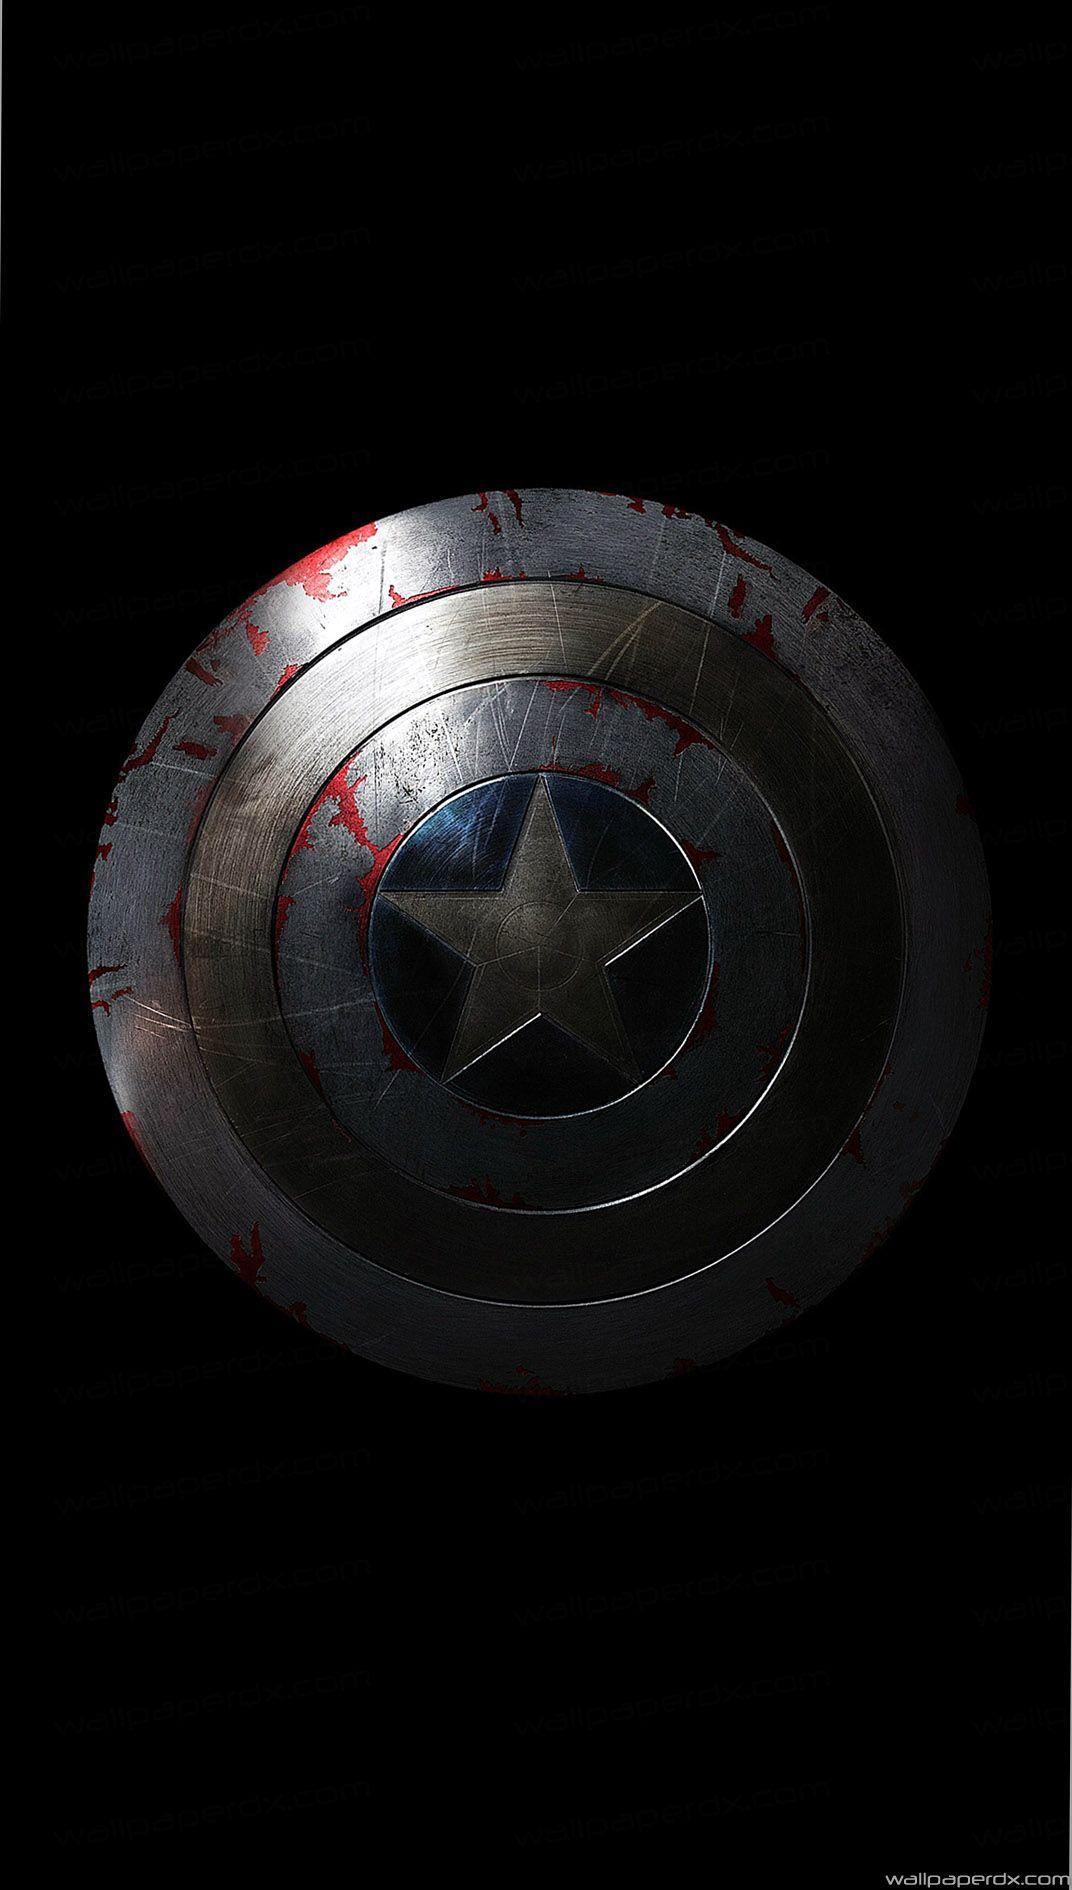 download the new for apple Captain America: Civil War